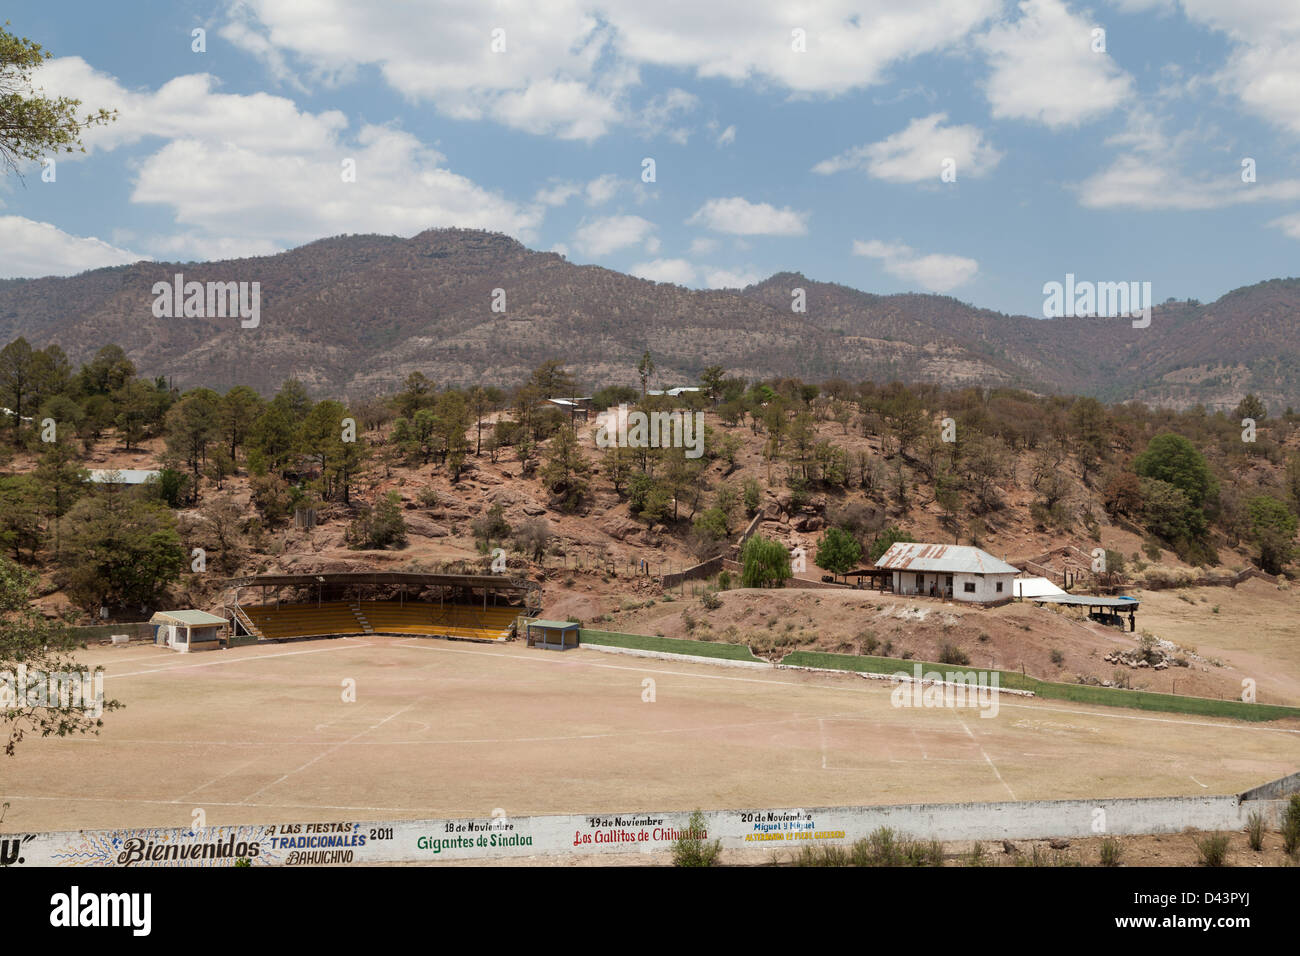 Bahuichivo sports ground in the heart of the Copper Canyon in the state of Chihuahua, Mexico Stock Photo